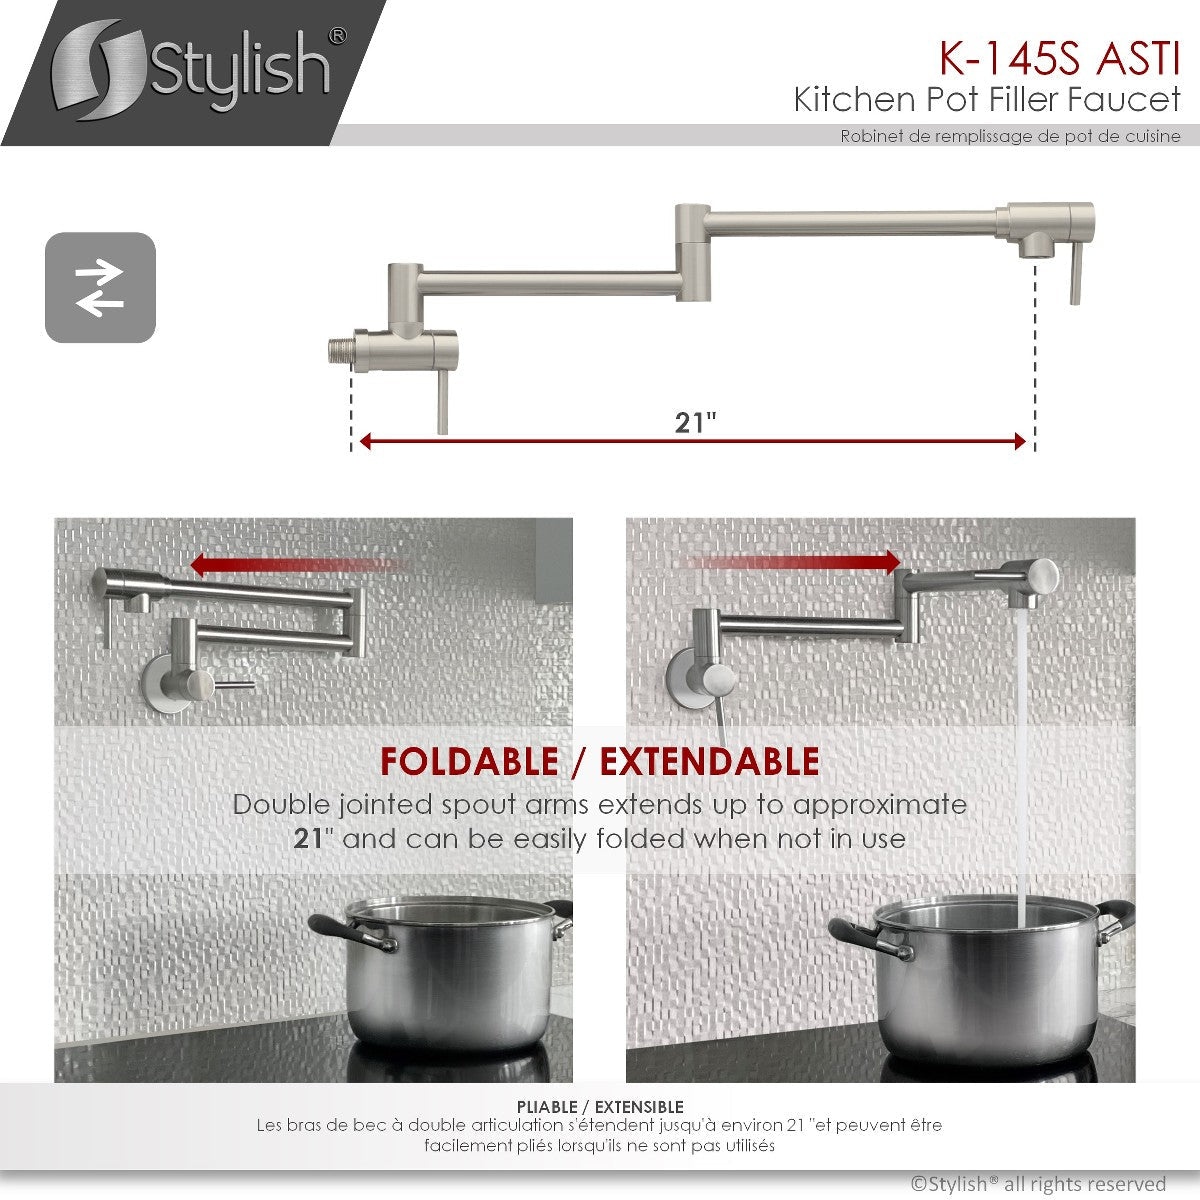 Stylish ASTI Stainless Steel Wall Mount Pot Filler Folding Stretchable with Single Hole Two Handles K-145S